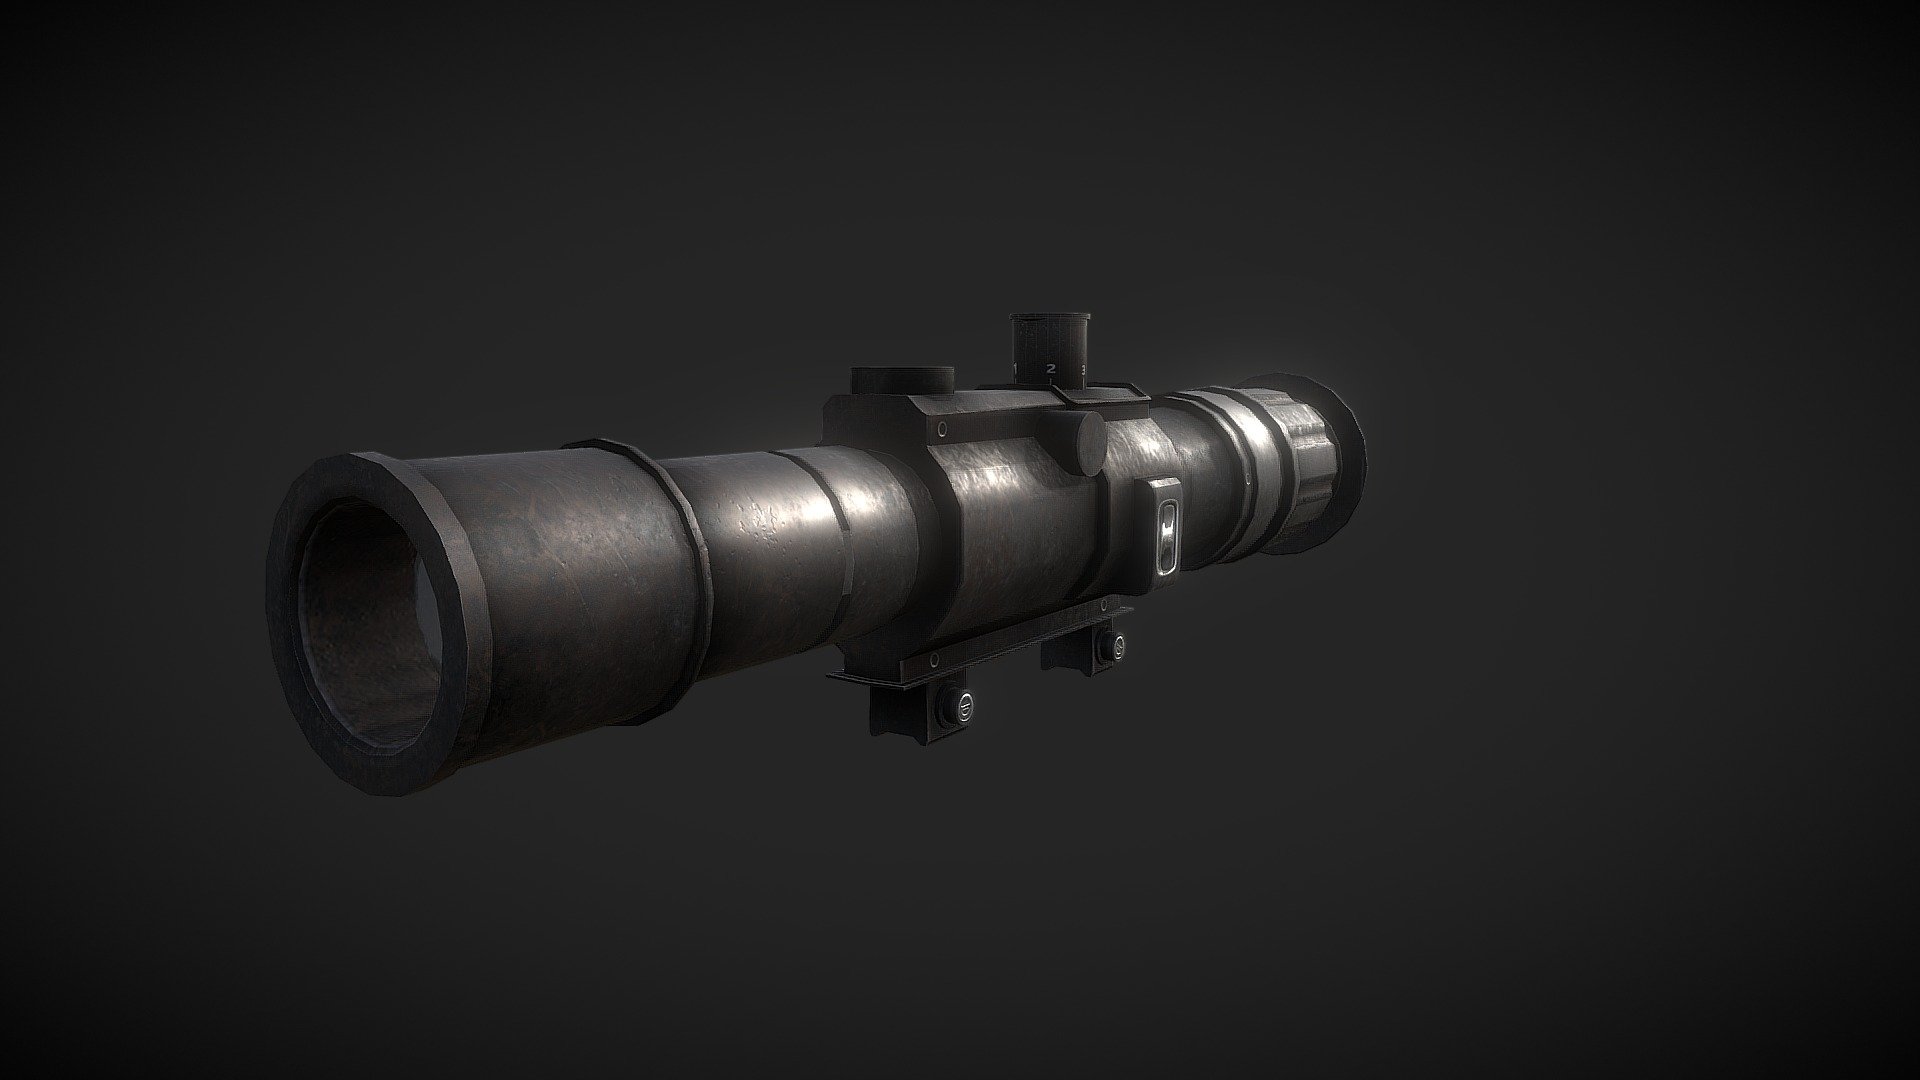 Sniper scope loosely based off the scope bused on the Russian Dragunov SVD rifle.

Modelled in Maya and textured in Substance Painter - Sniper Scope - 3D model by FWTeastwood 3d model